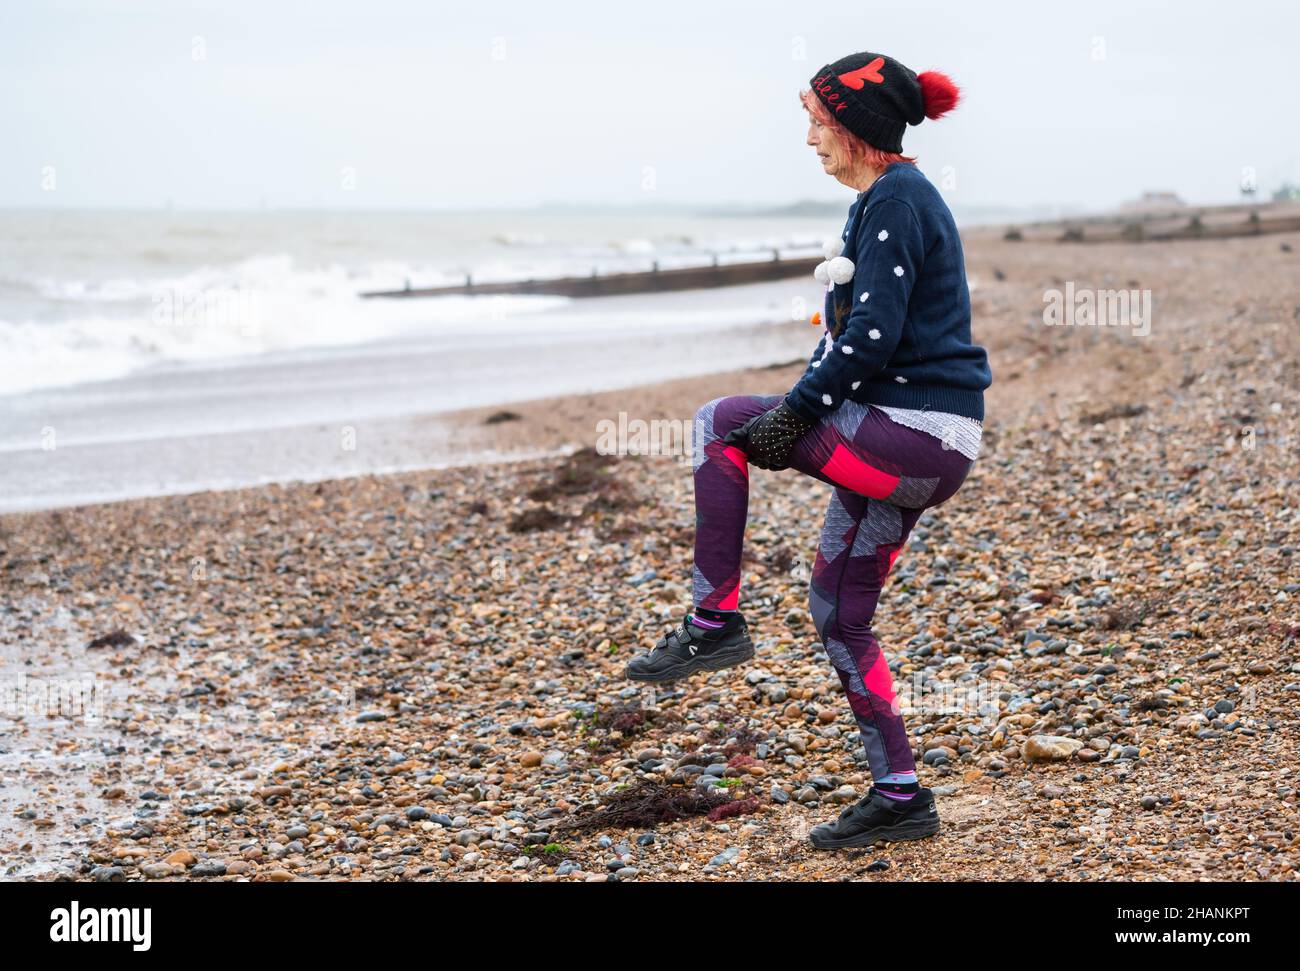 Elderly senior woman in her 80s on a beach by the sea exercising in Winter. Old lady keeping an active healthy lifestyle on the South Coast in the UK. Stock Photo